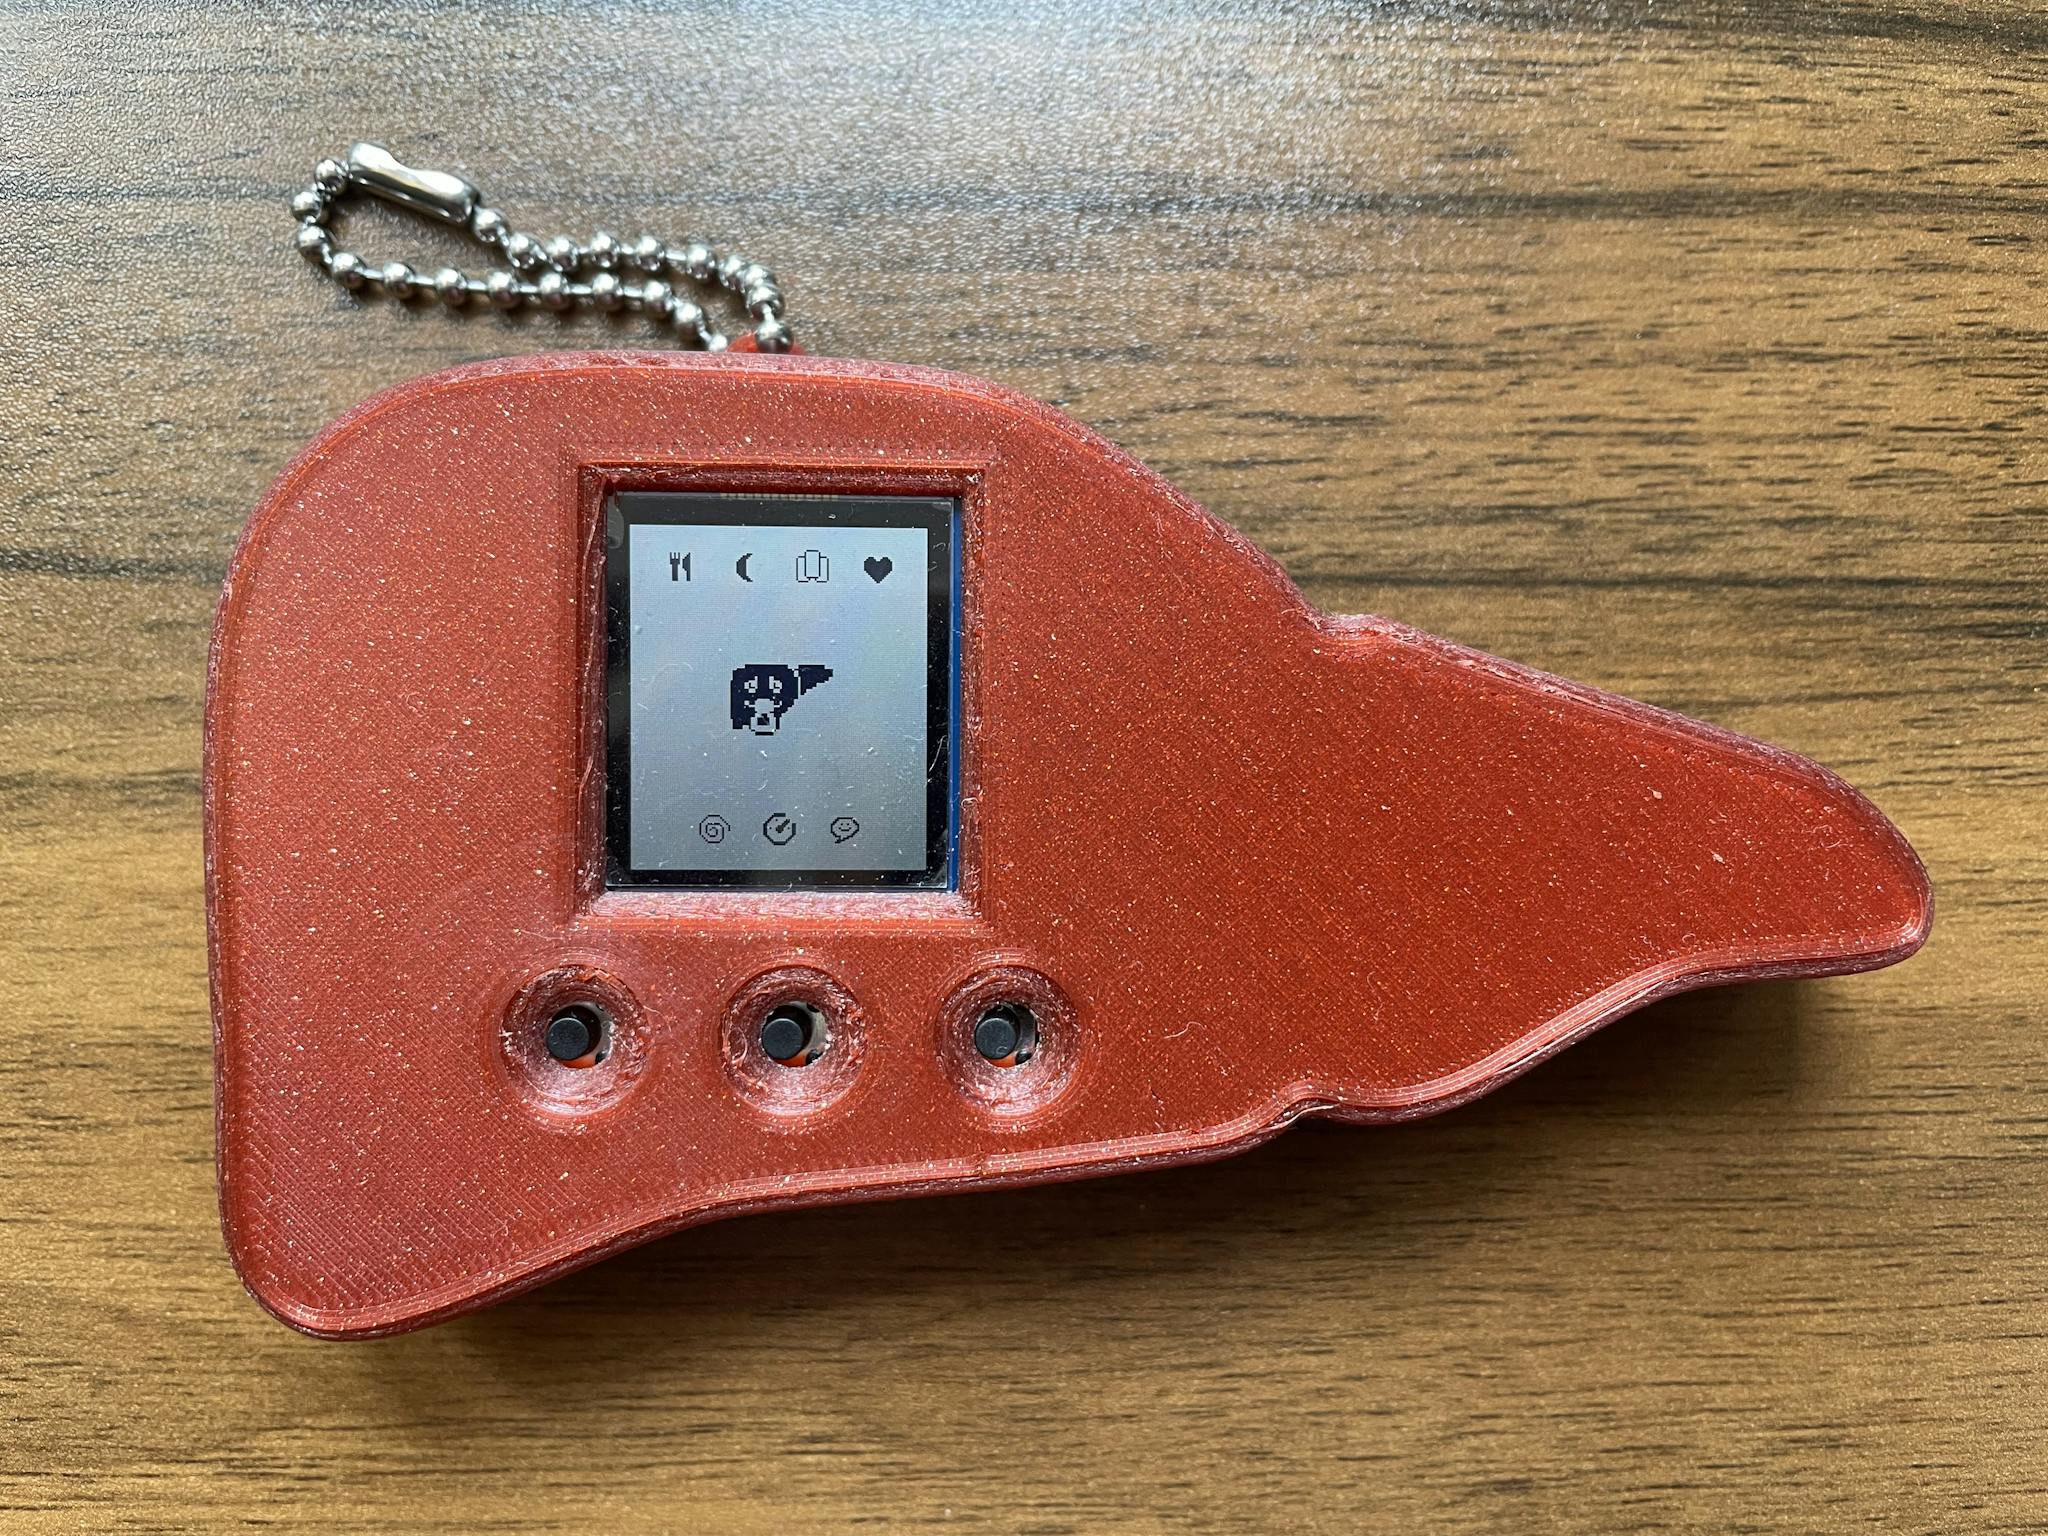 A tamagotchi-like toy, in the shape of a liver with a digital image of a liver on screen in pixel art.